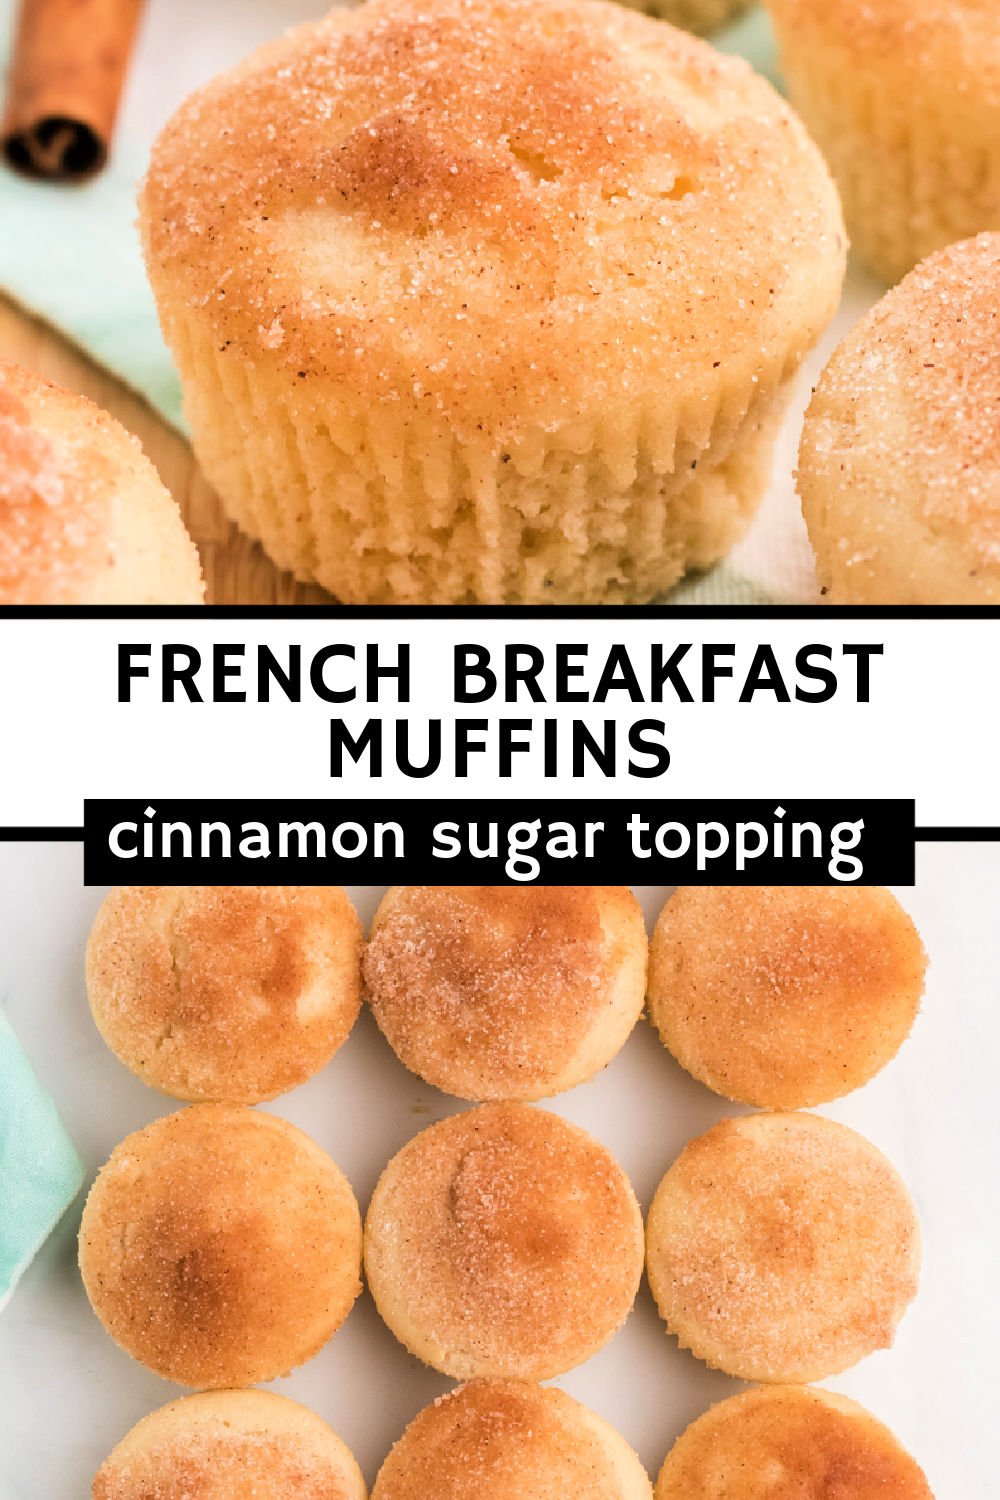 These French Breakfast Muffins, aka French Breakfast Puffs, are little bites of heaven. Imagine biting into a tender vanilla muffin that’s been soaked in hot melted butter and then rolled in cinnamon and sugar for the perfect amount of sweetness. It’s like the perfect Snickerdoodle muffin recipe. | www.persnicketyplates.com